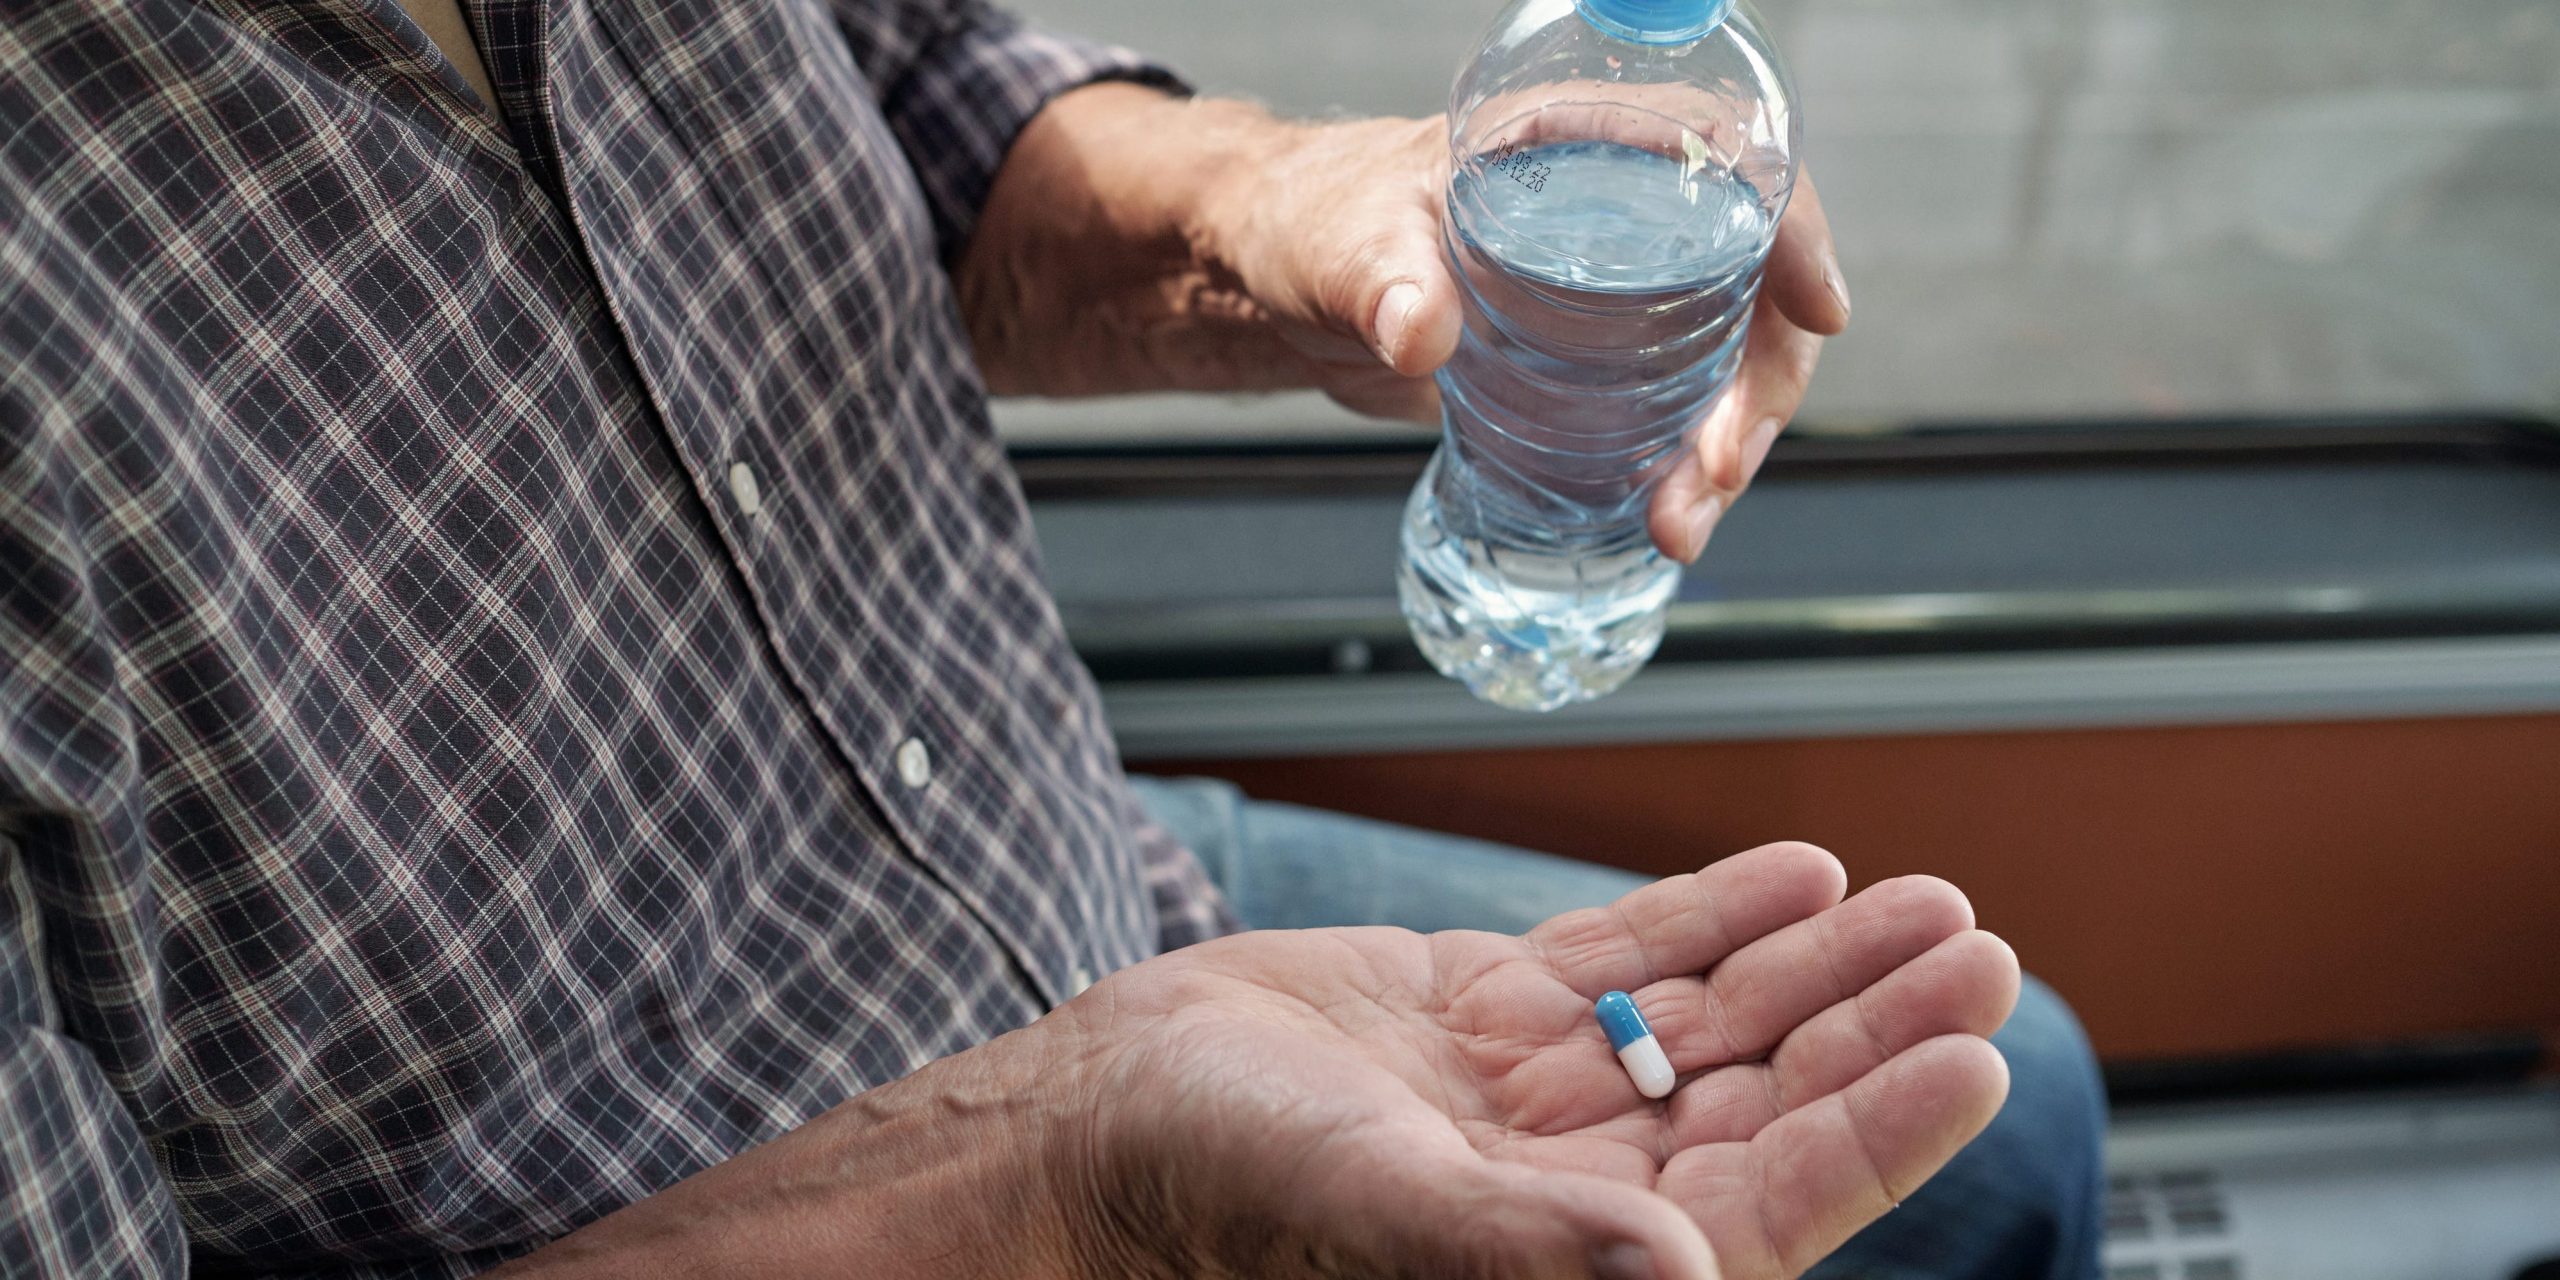 Close-up of unrecognizable aged man in casual shirt holding bottle of water and taking dramamine pill in bus